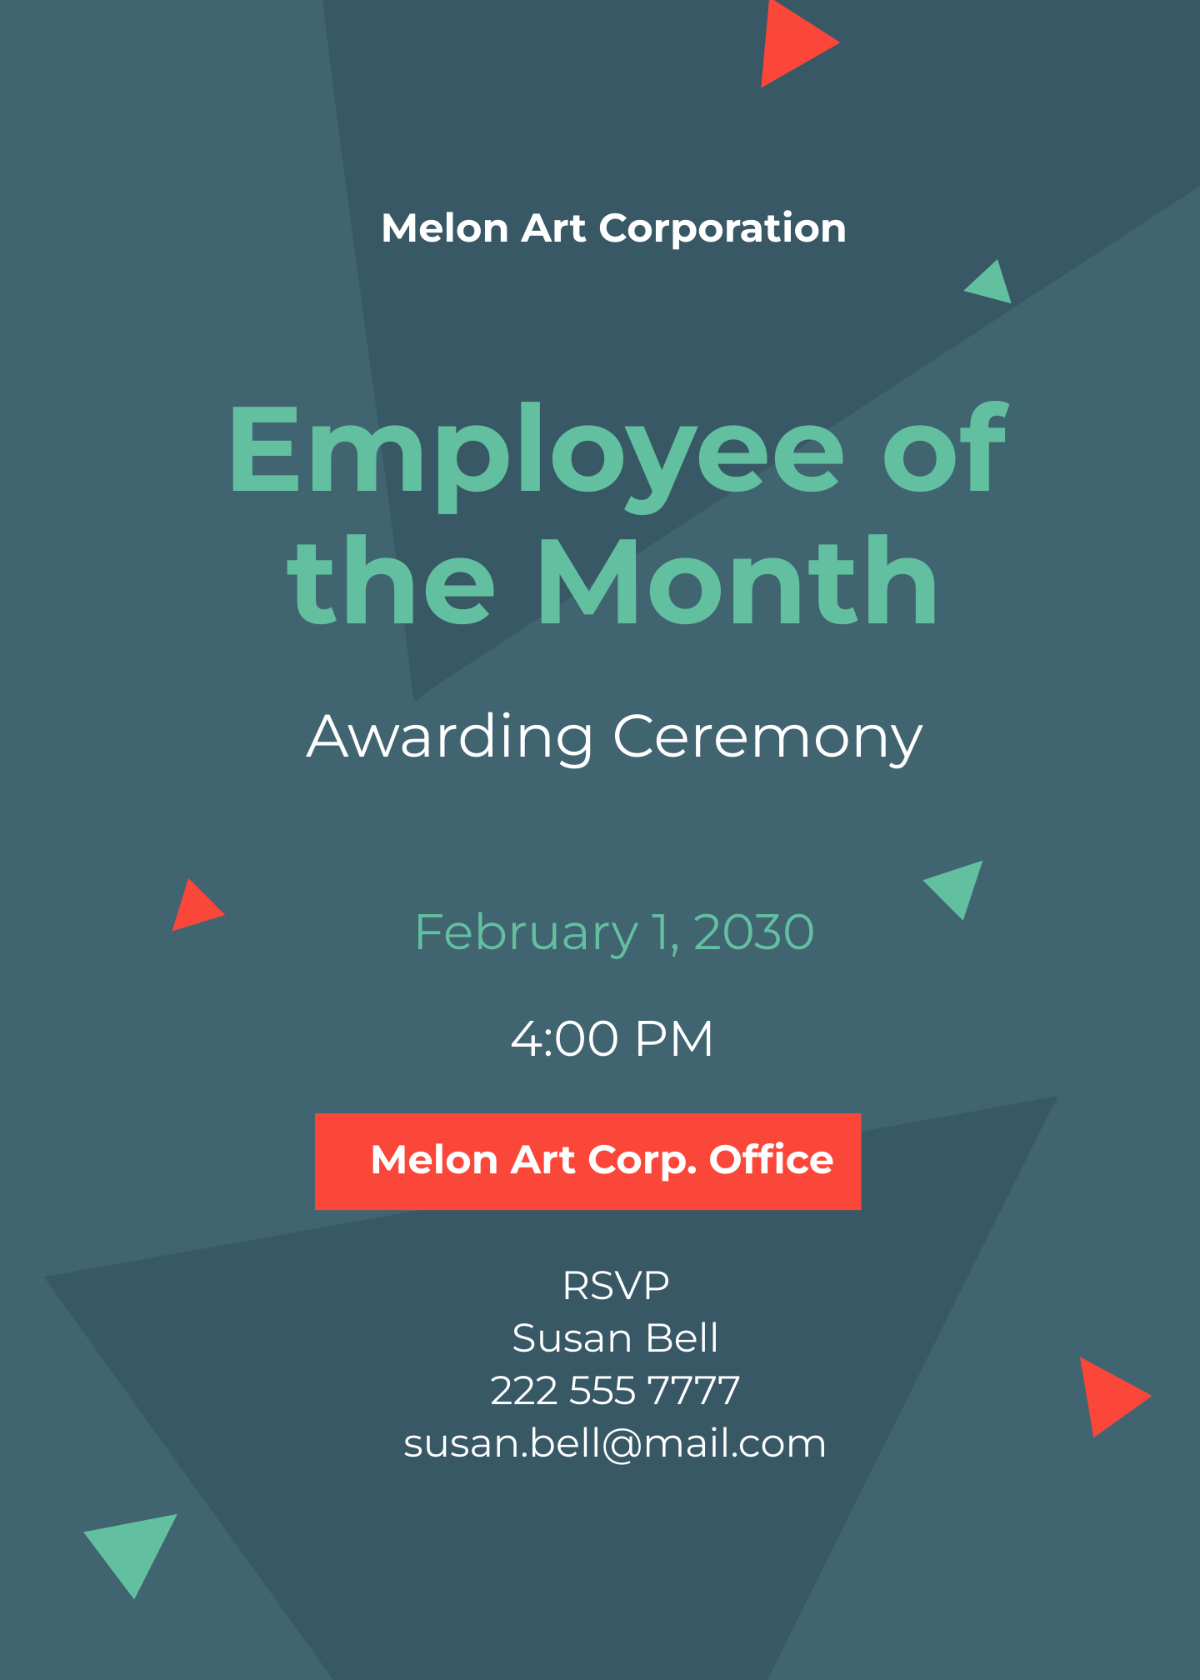 Employee of the Month Invitation